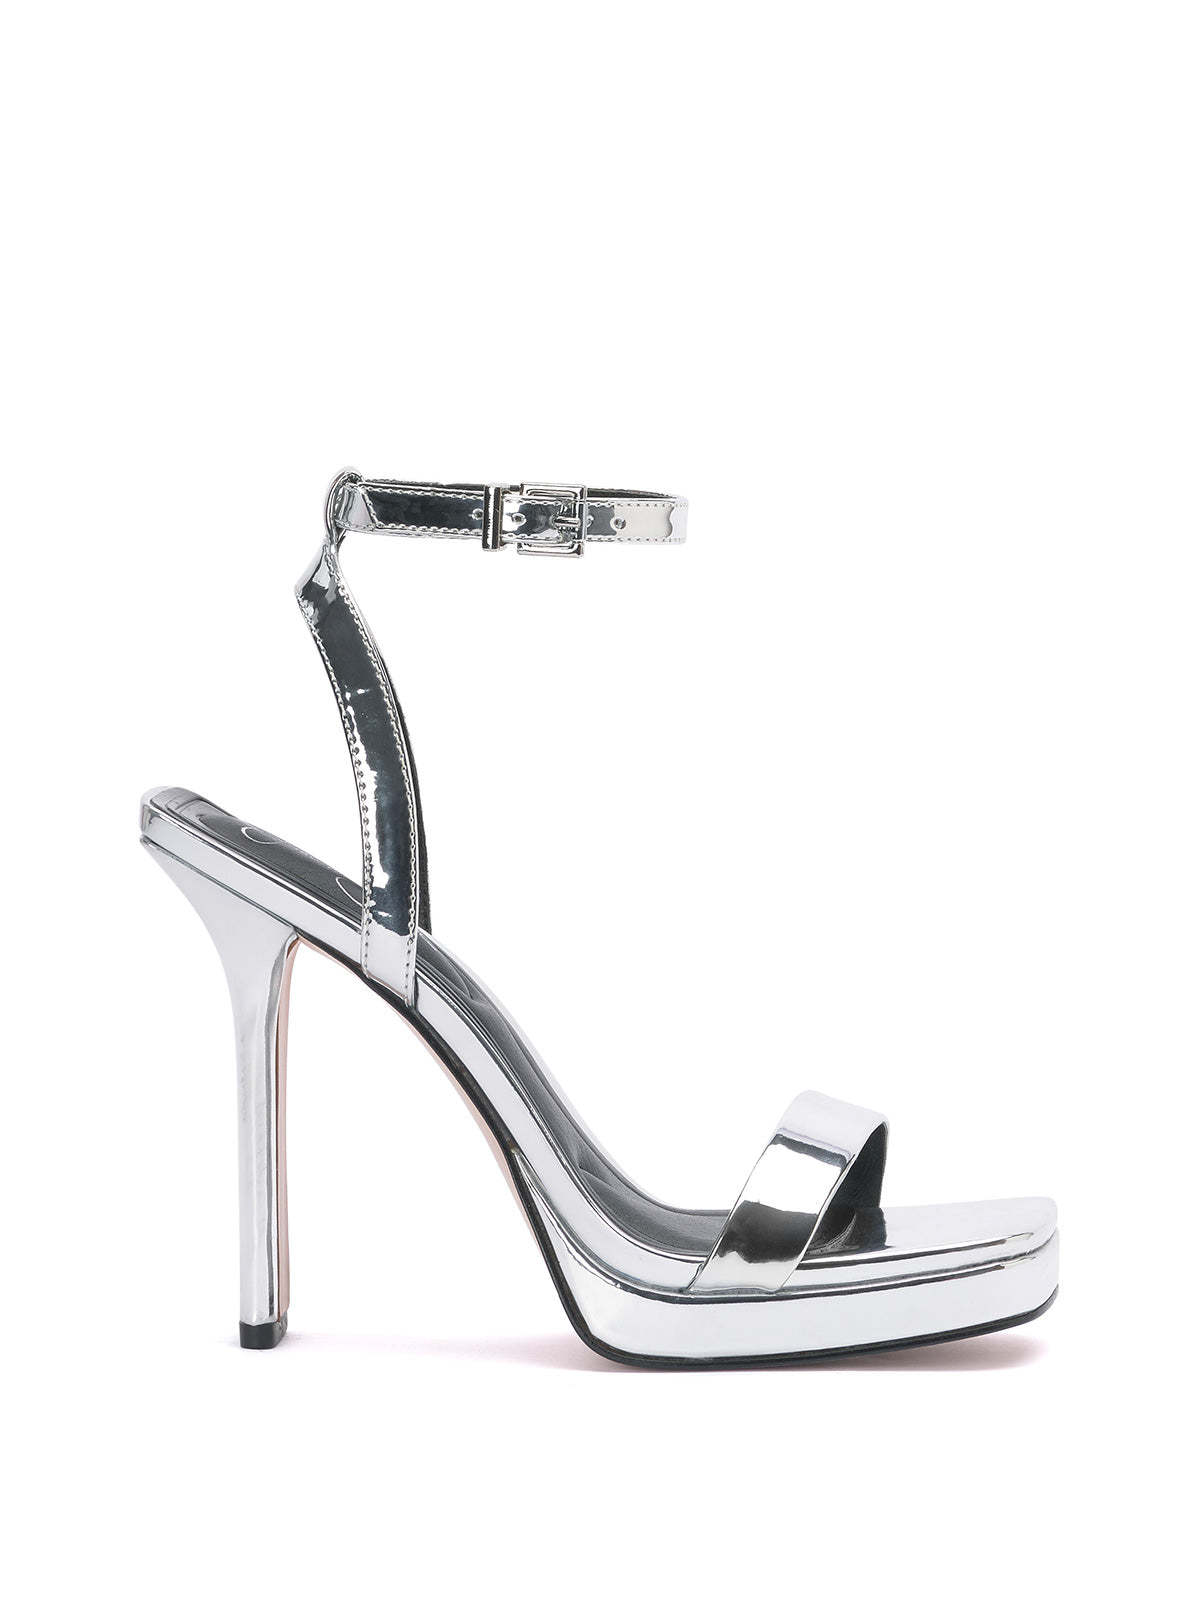 Sandals - Silver-coloured - Ladies | H&M IN